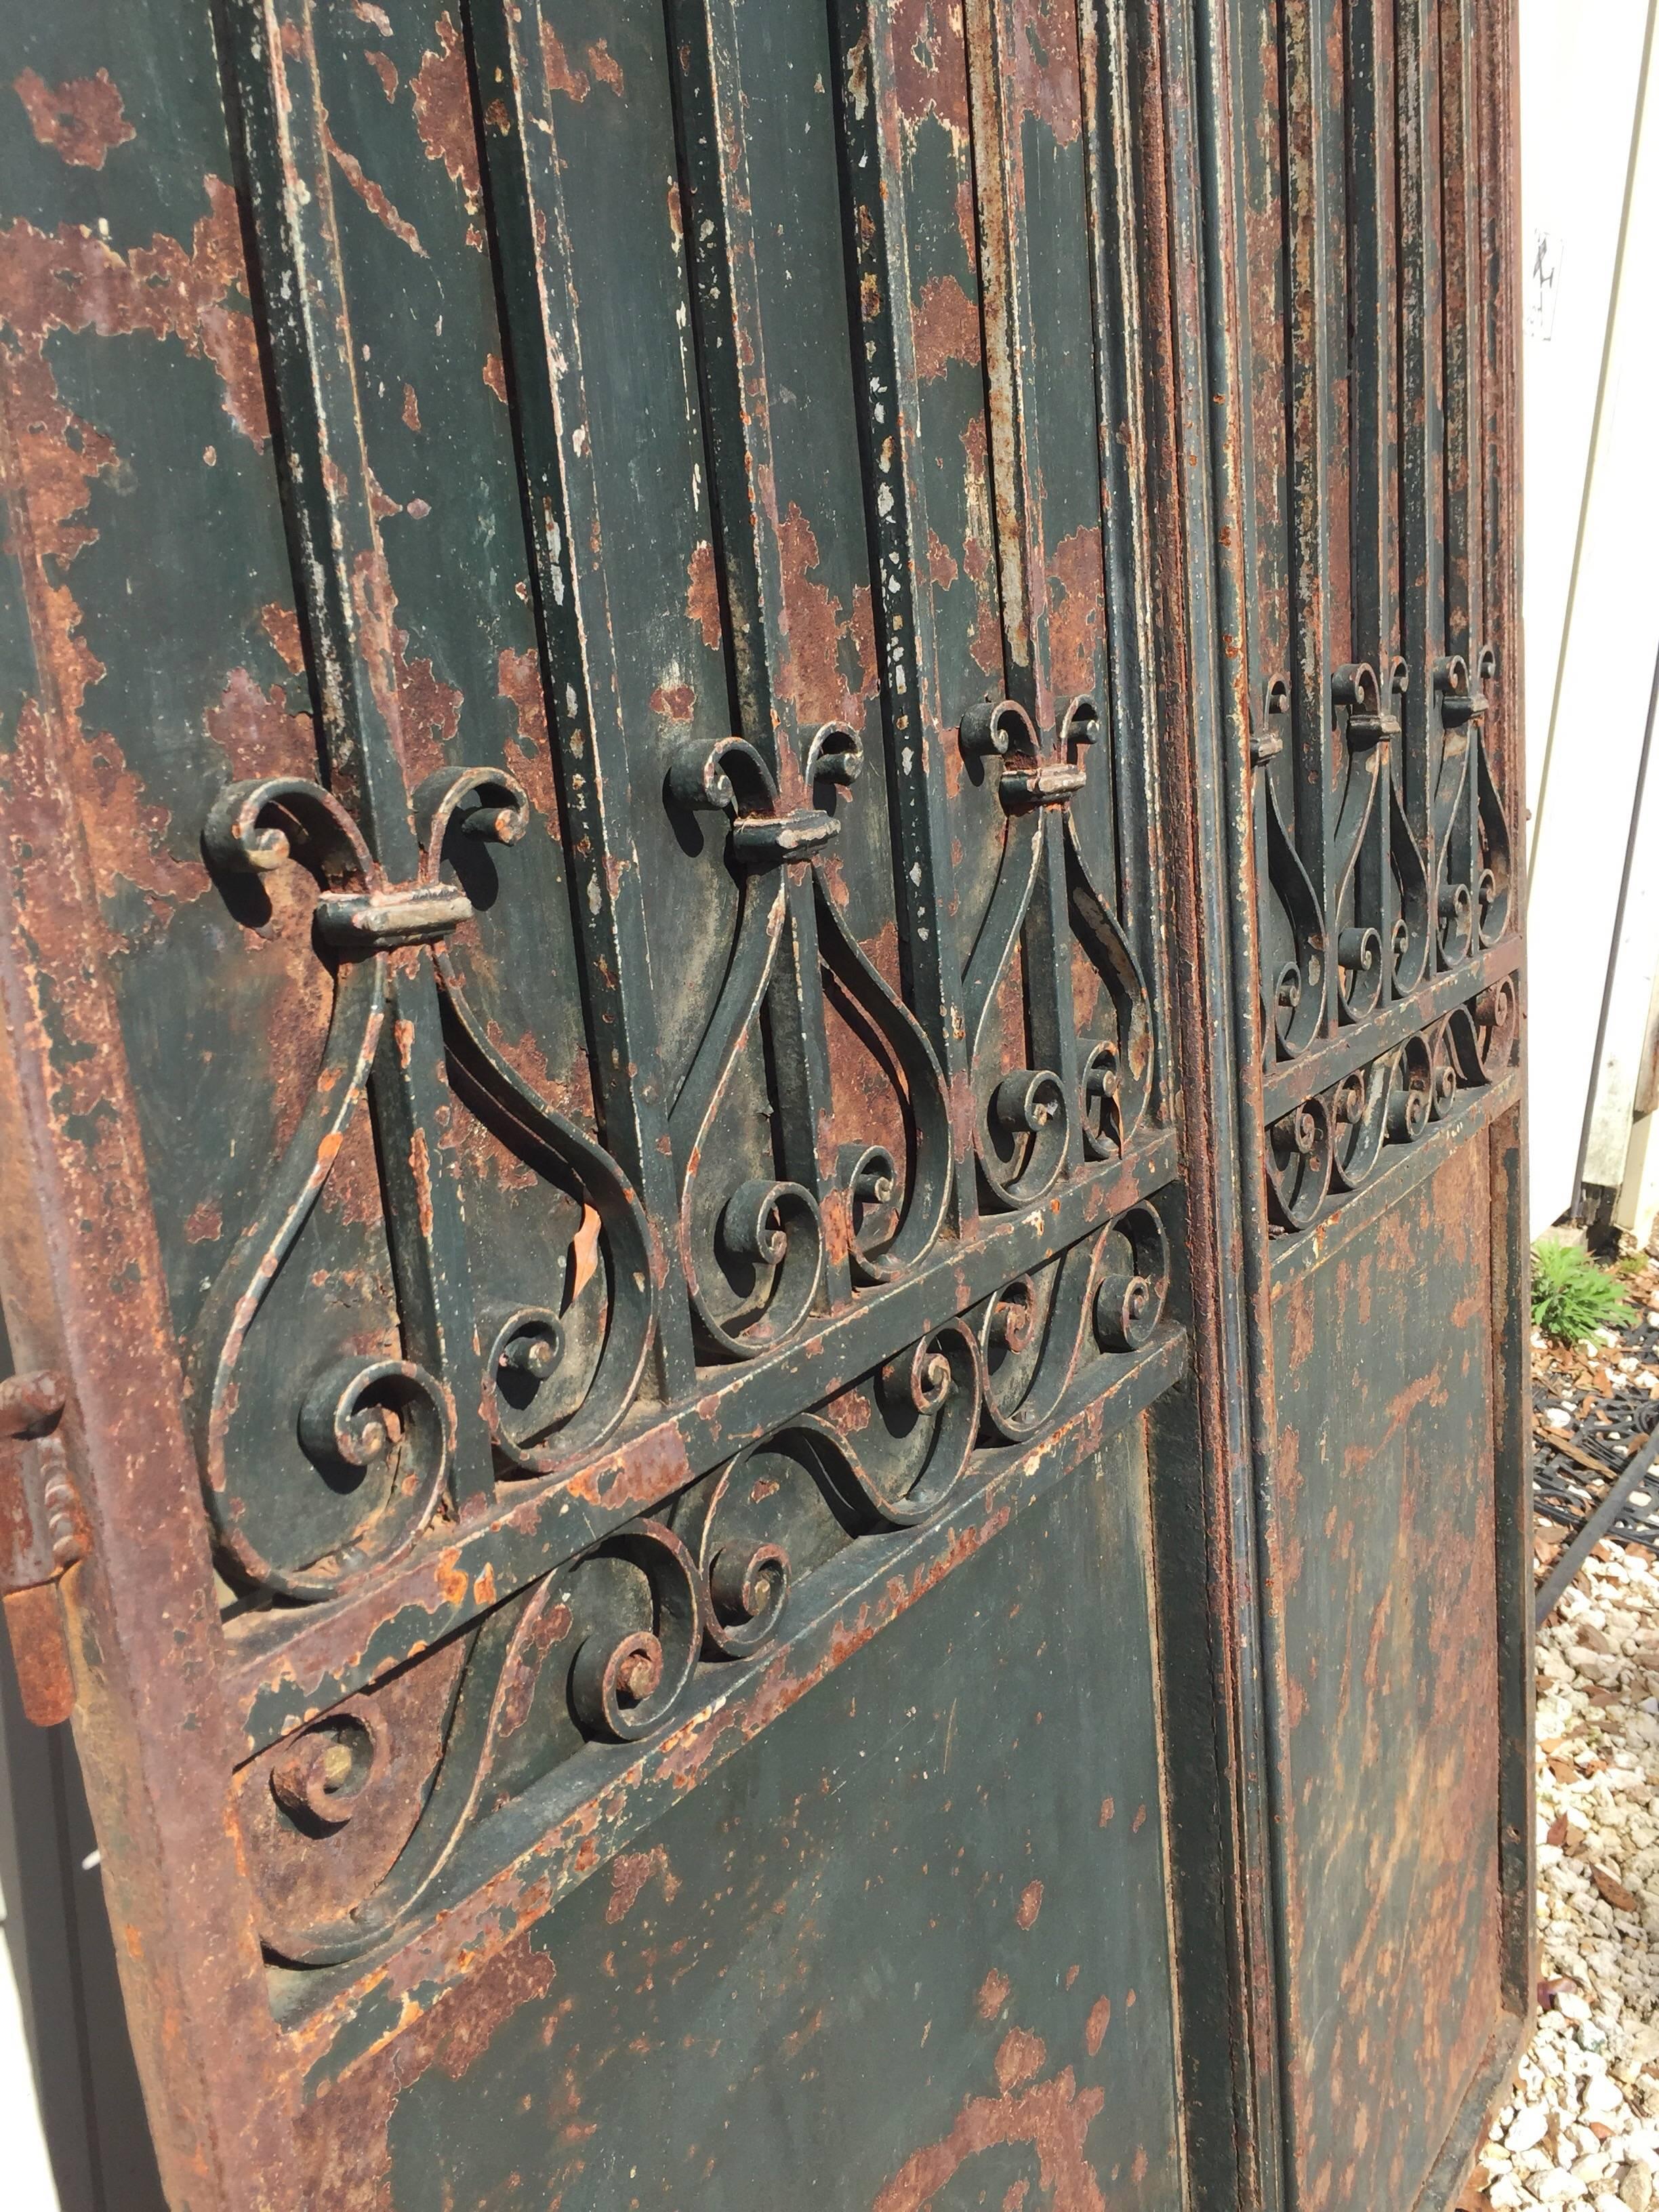 An exceptional pair of French 19th century garden gates from the Provenance region of France. Created with expert craftsmanship, these gates are of outstanding quality with a terrific patina. This gate does not include hardware or keys.